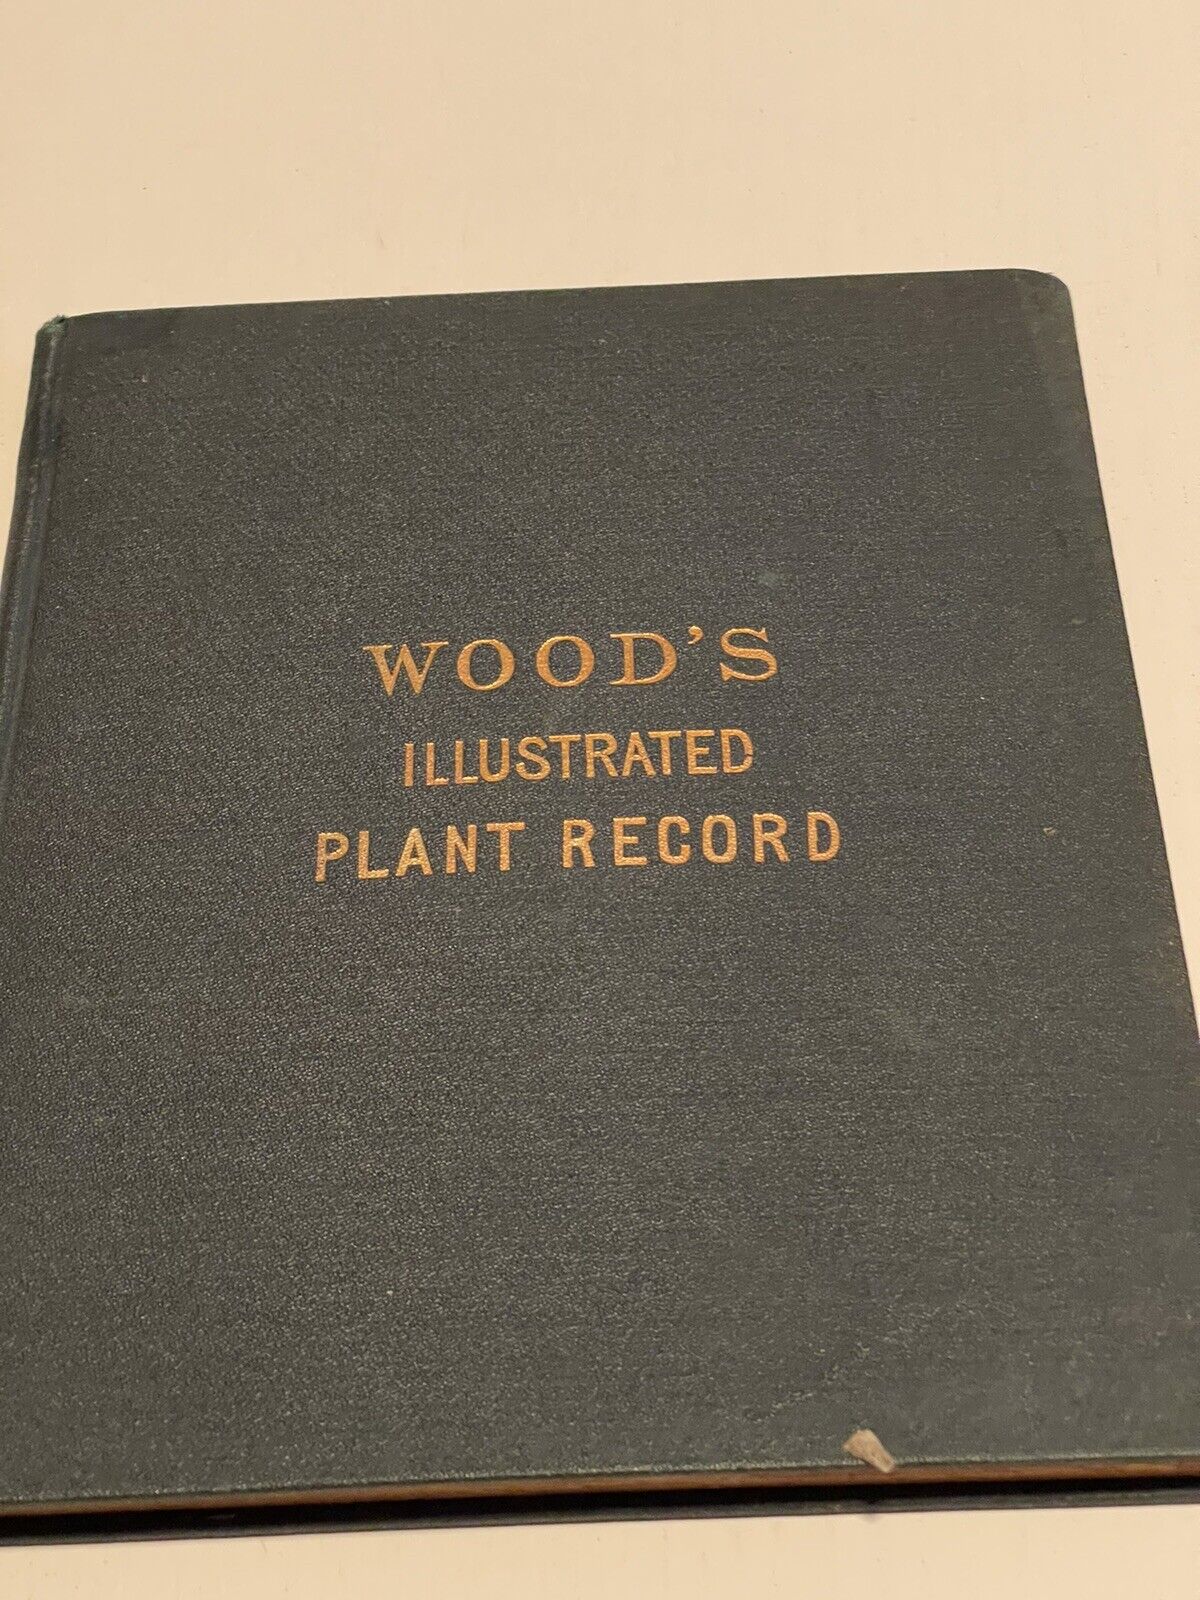 Wood’s illustrated plant record handwritten with pressed plants 1902